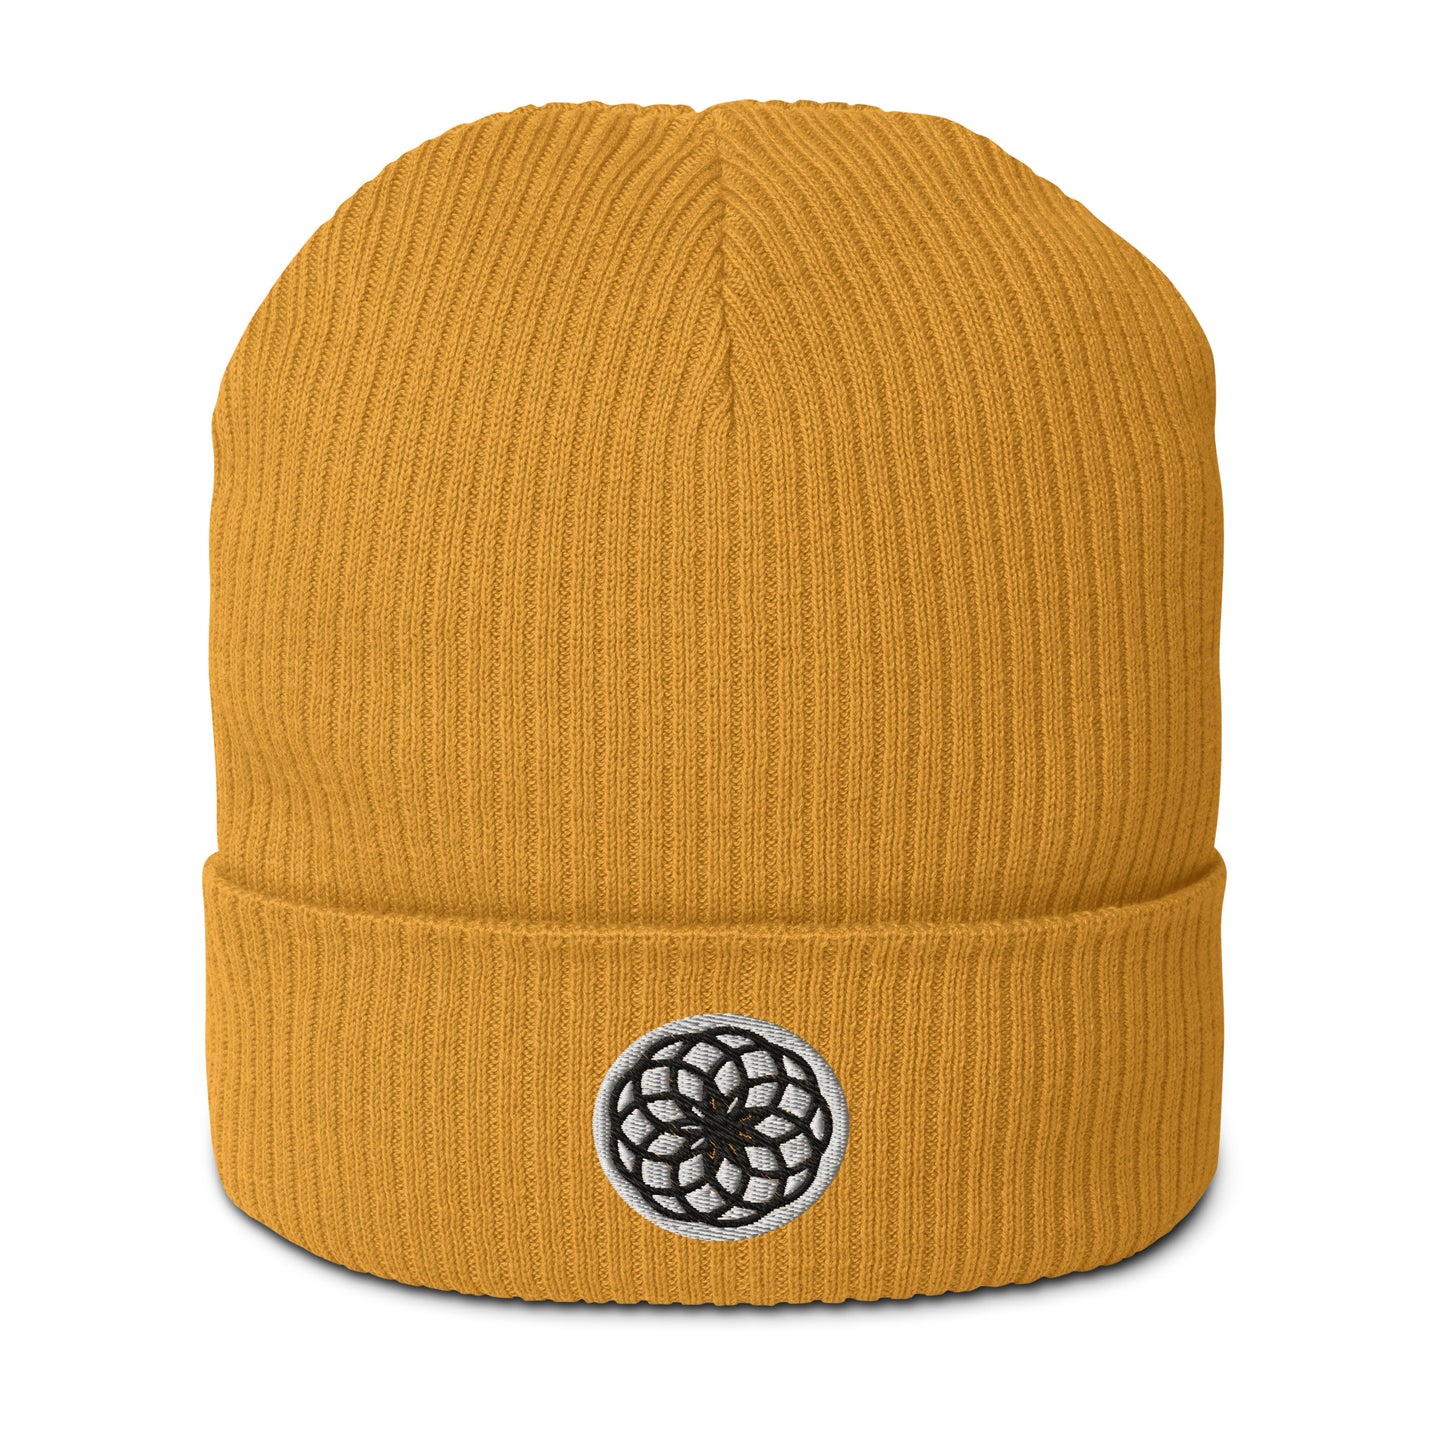 Check out our Organic Cotton Lotus of Life Beanie in Mustard Yellow. Made from organic cotton and featuring a Lotus of Life embroidery, it's not your average hat. It's about purity, growth, and embracing life. Plus, it's made of breathable and lightweight natural fabric, so you can stay comfy wherever your journey takes you. Grab one and add a laid-back, high vibe touch to your style.